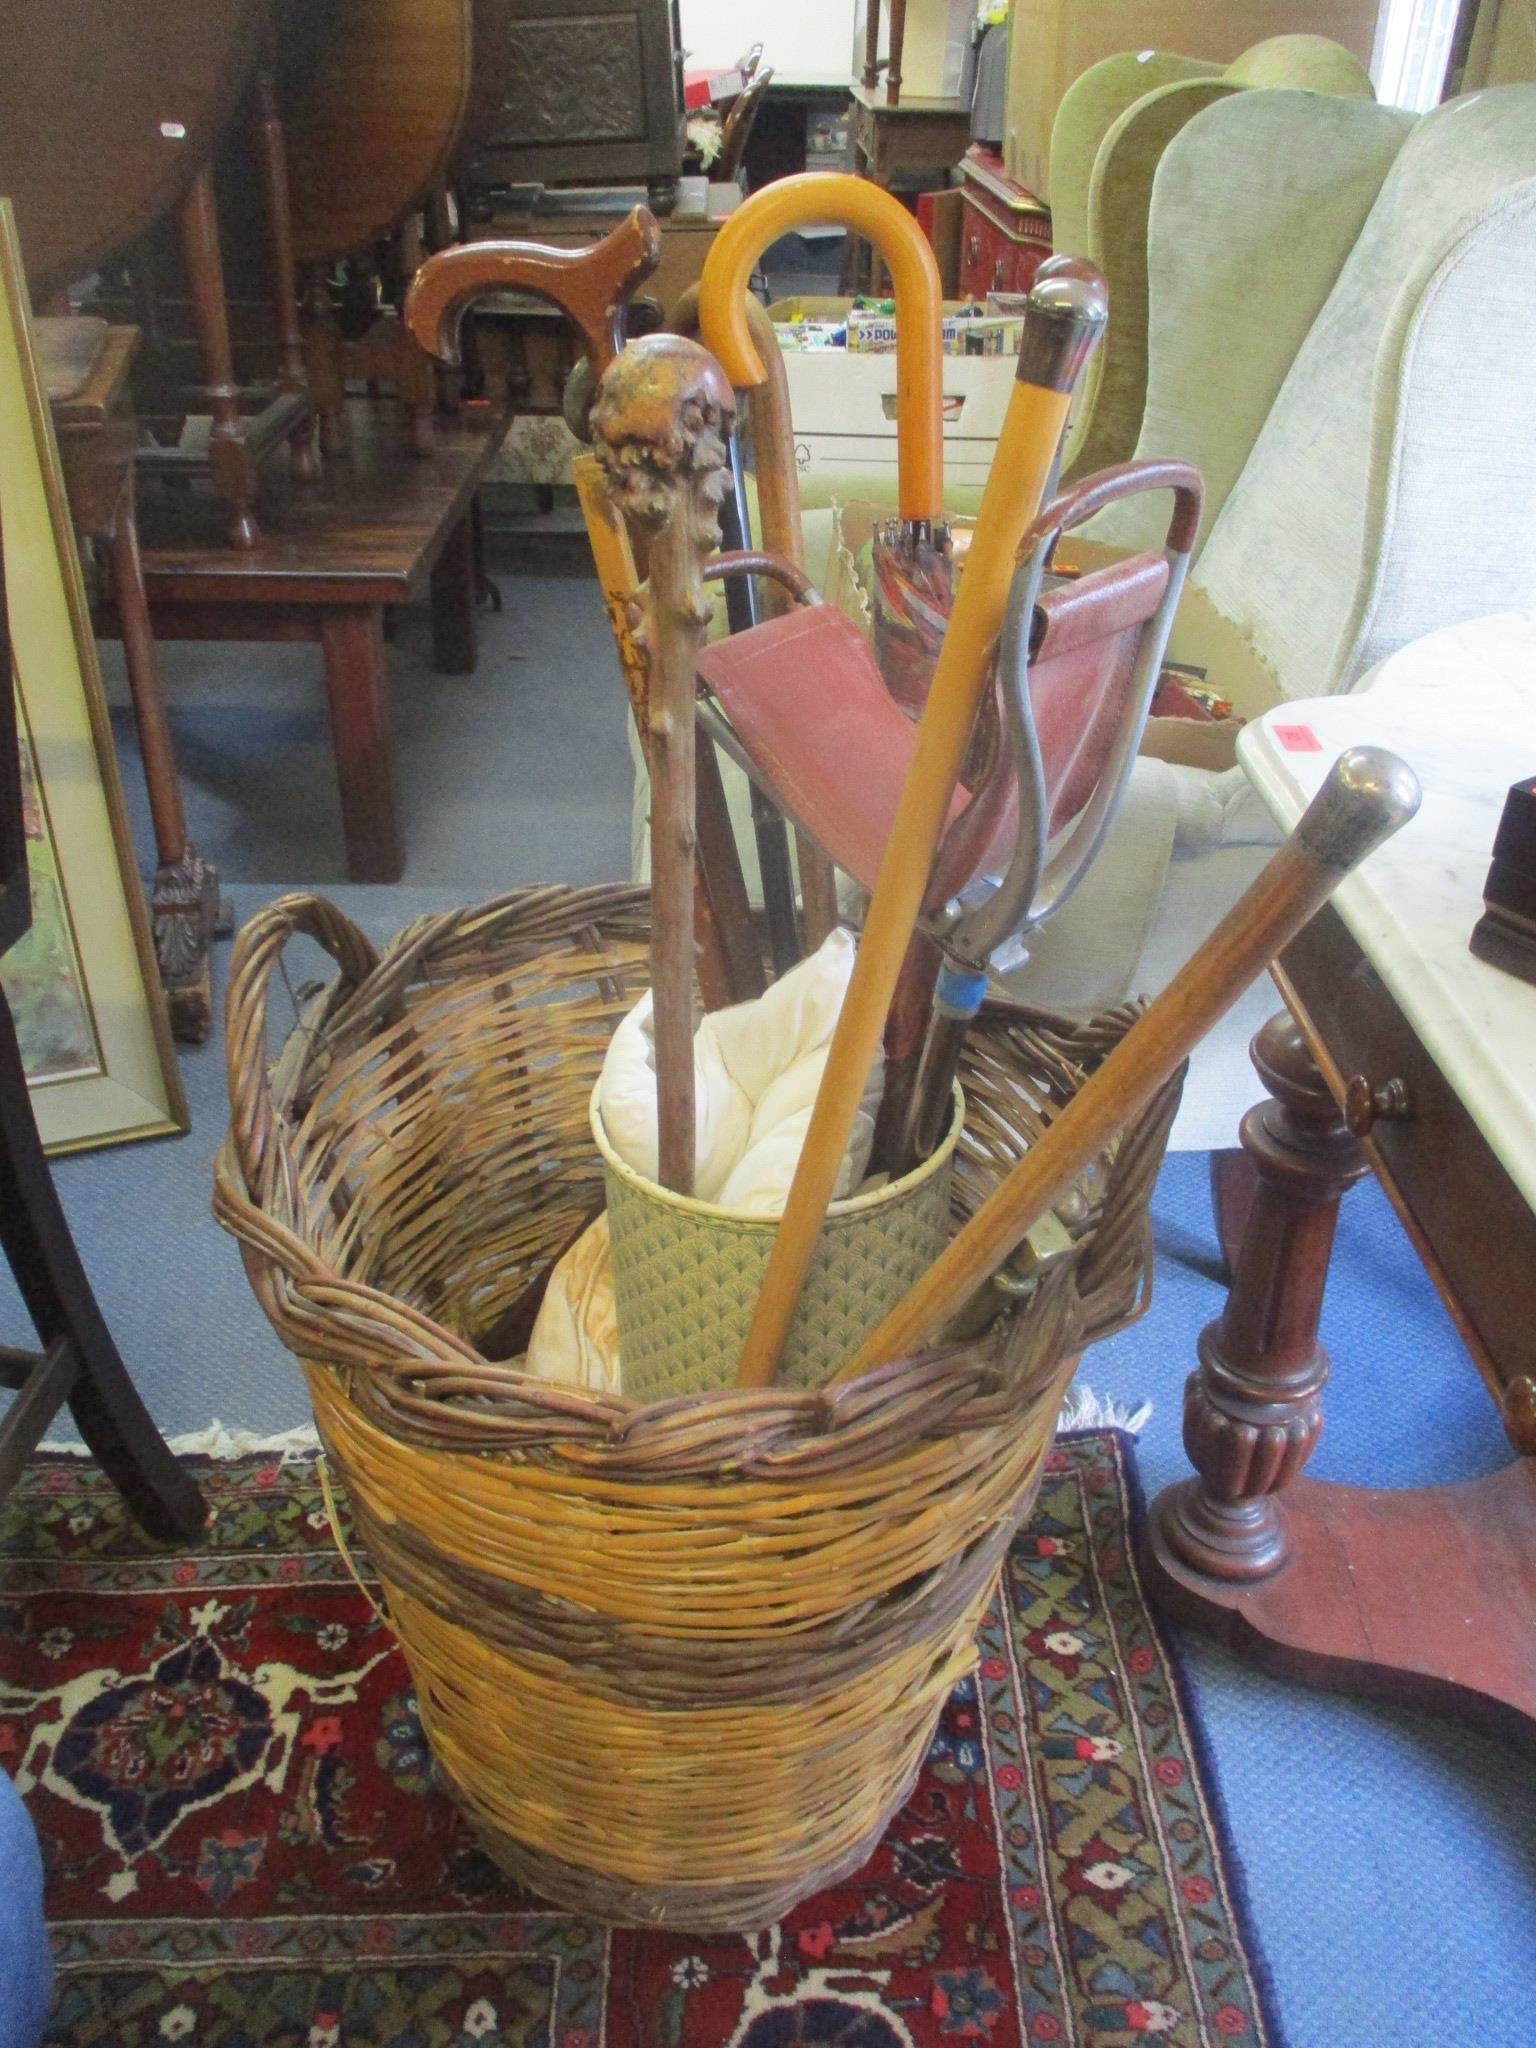 Mixed walking sticks, together with a shooting stick, fire implements and a wicker basket